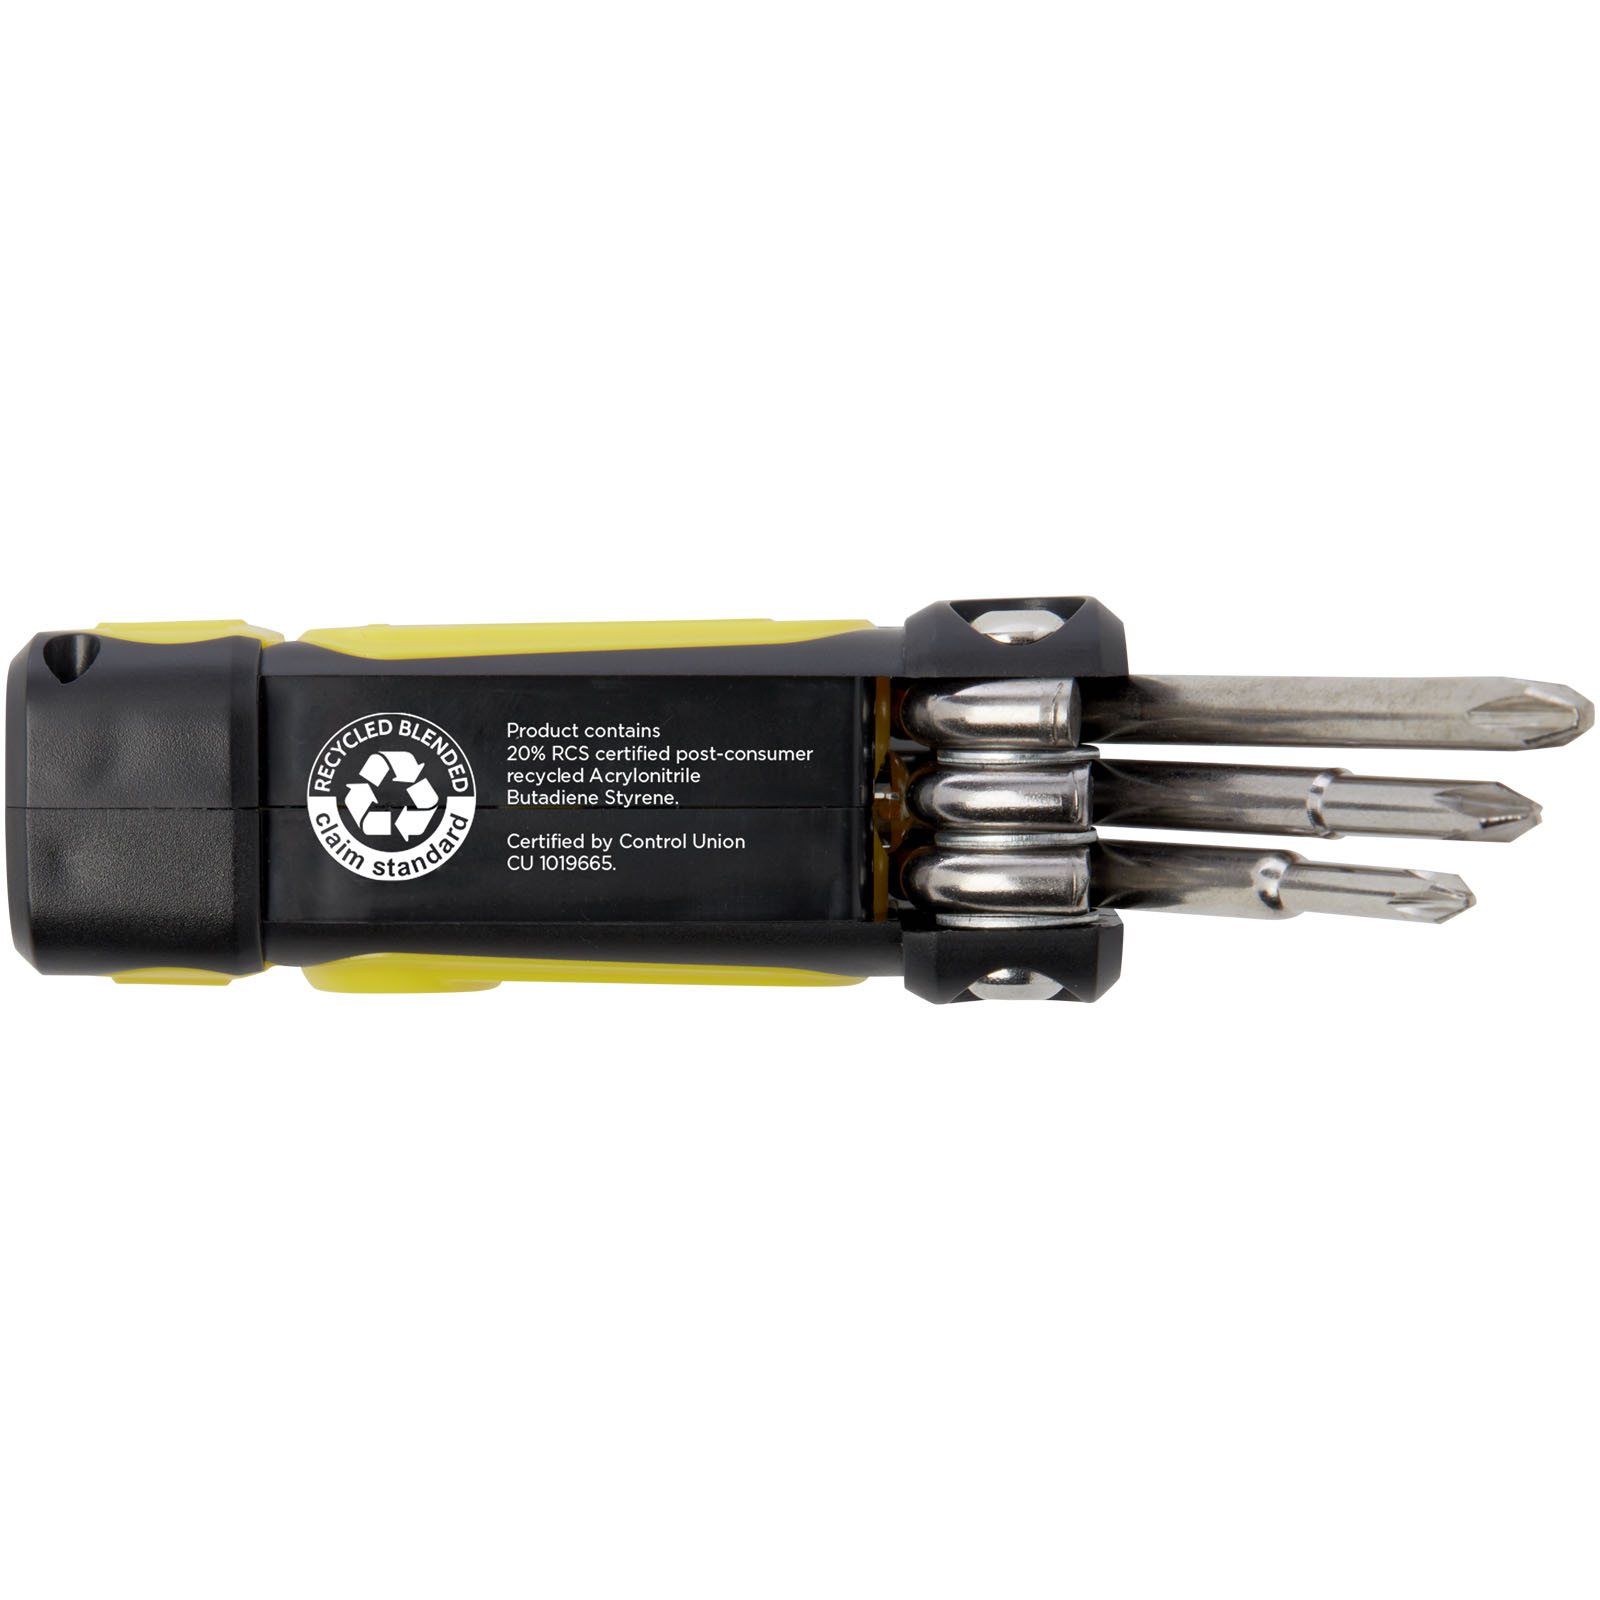 Advertising Tool sets - Octo 8-in-1 RCS recycled plastic screwdriver set with torch - 5